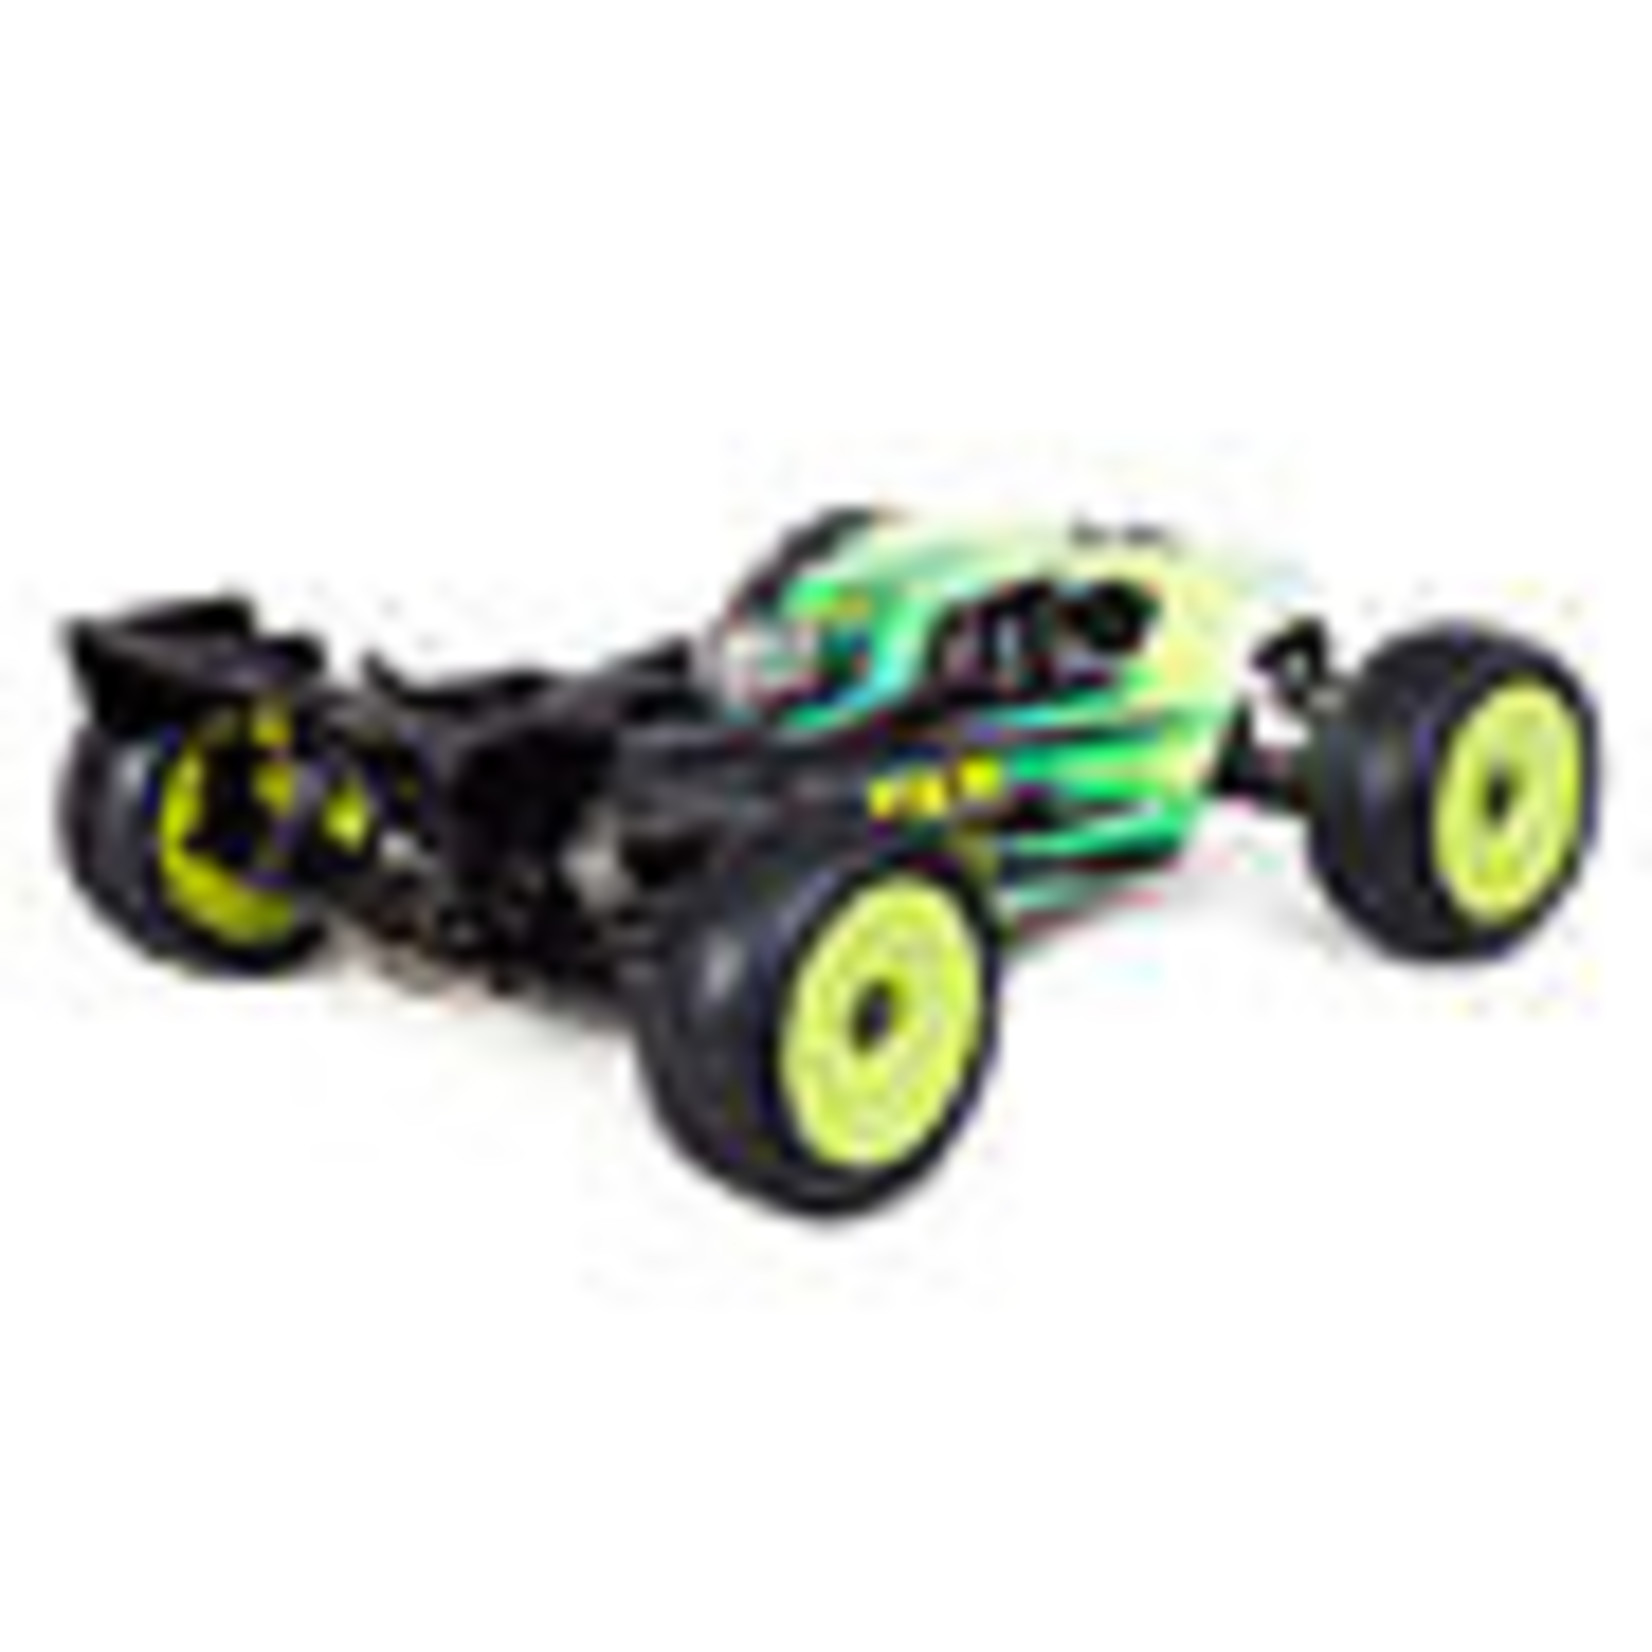 TLR (Team Losi Racing) TLR04009 1/8 8IGHT-XT/XTE 4WD Nitro/Electric Truggy Race Kit